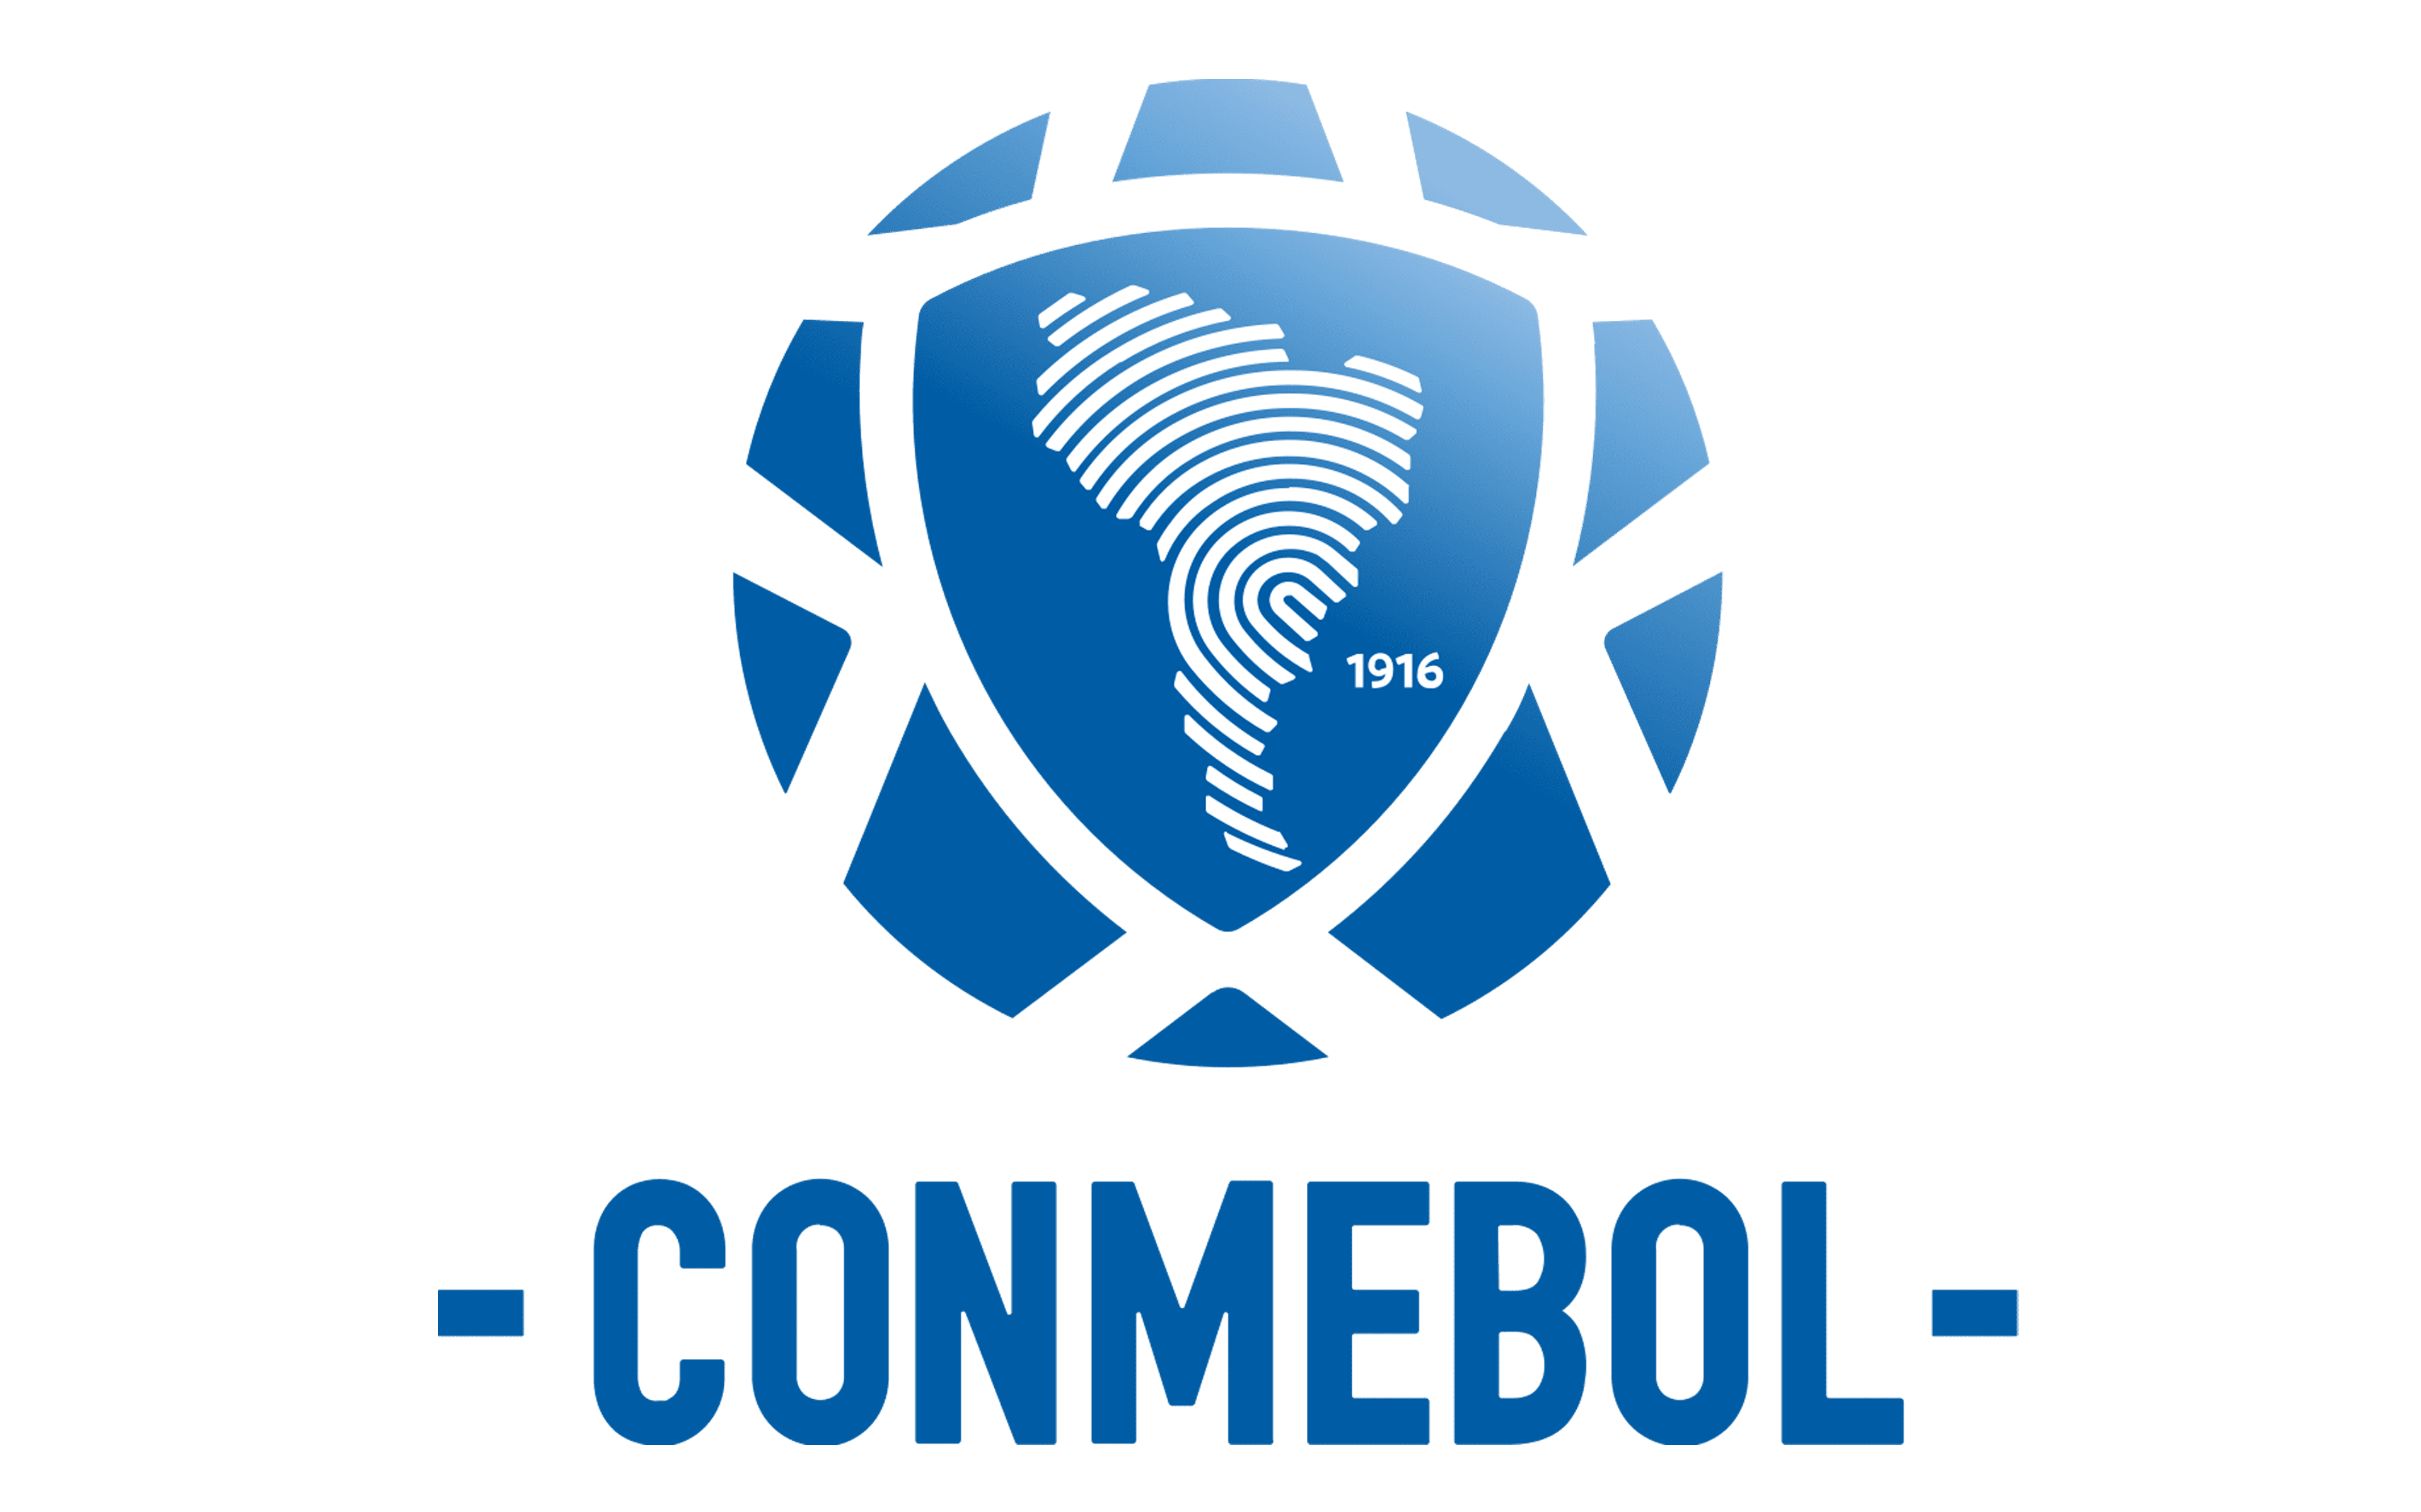 CONMEBOL logo and symbol, meaning, history, PNG, brand